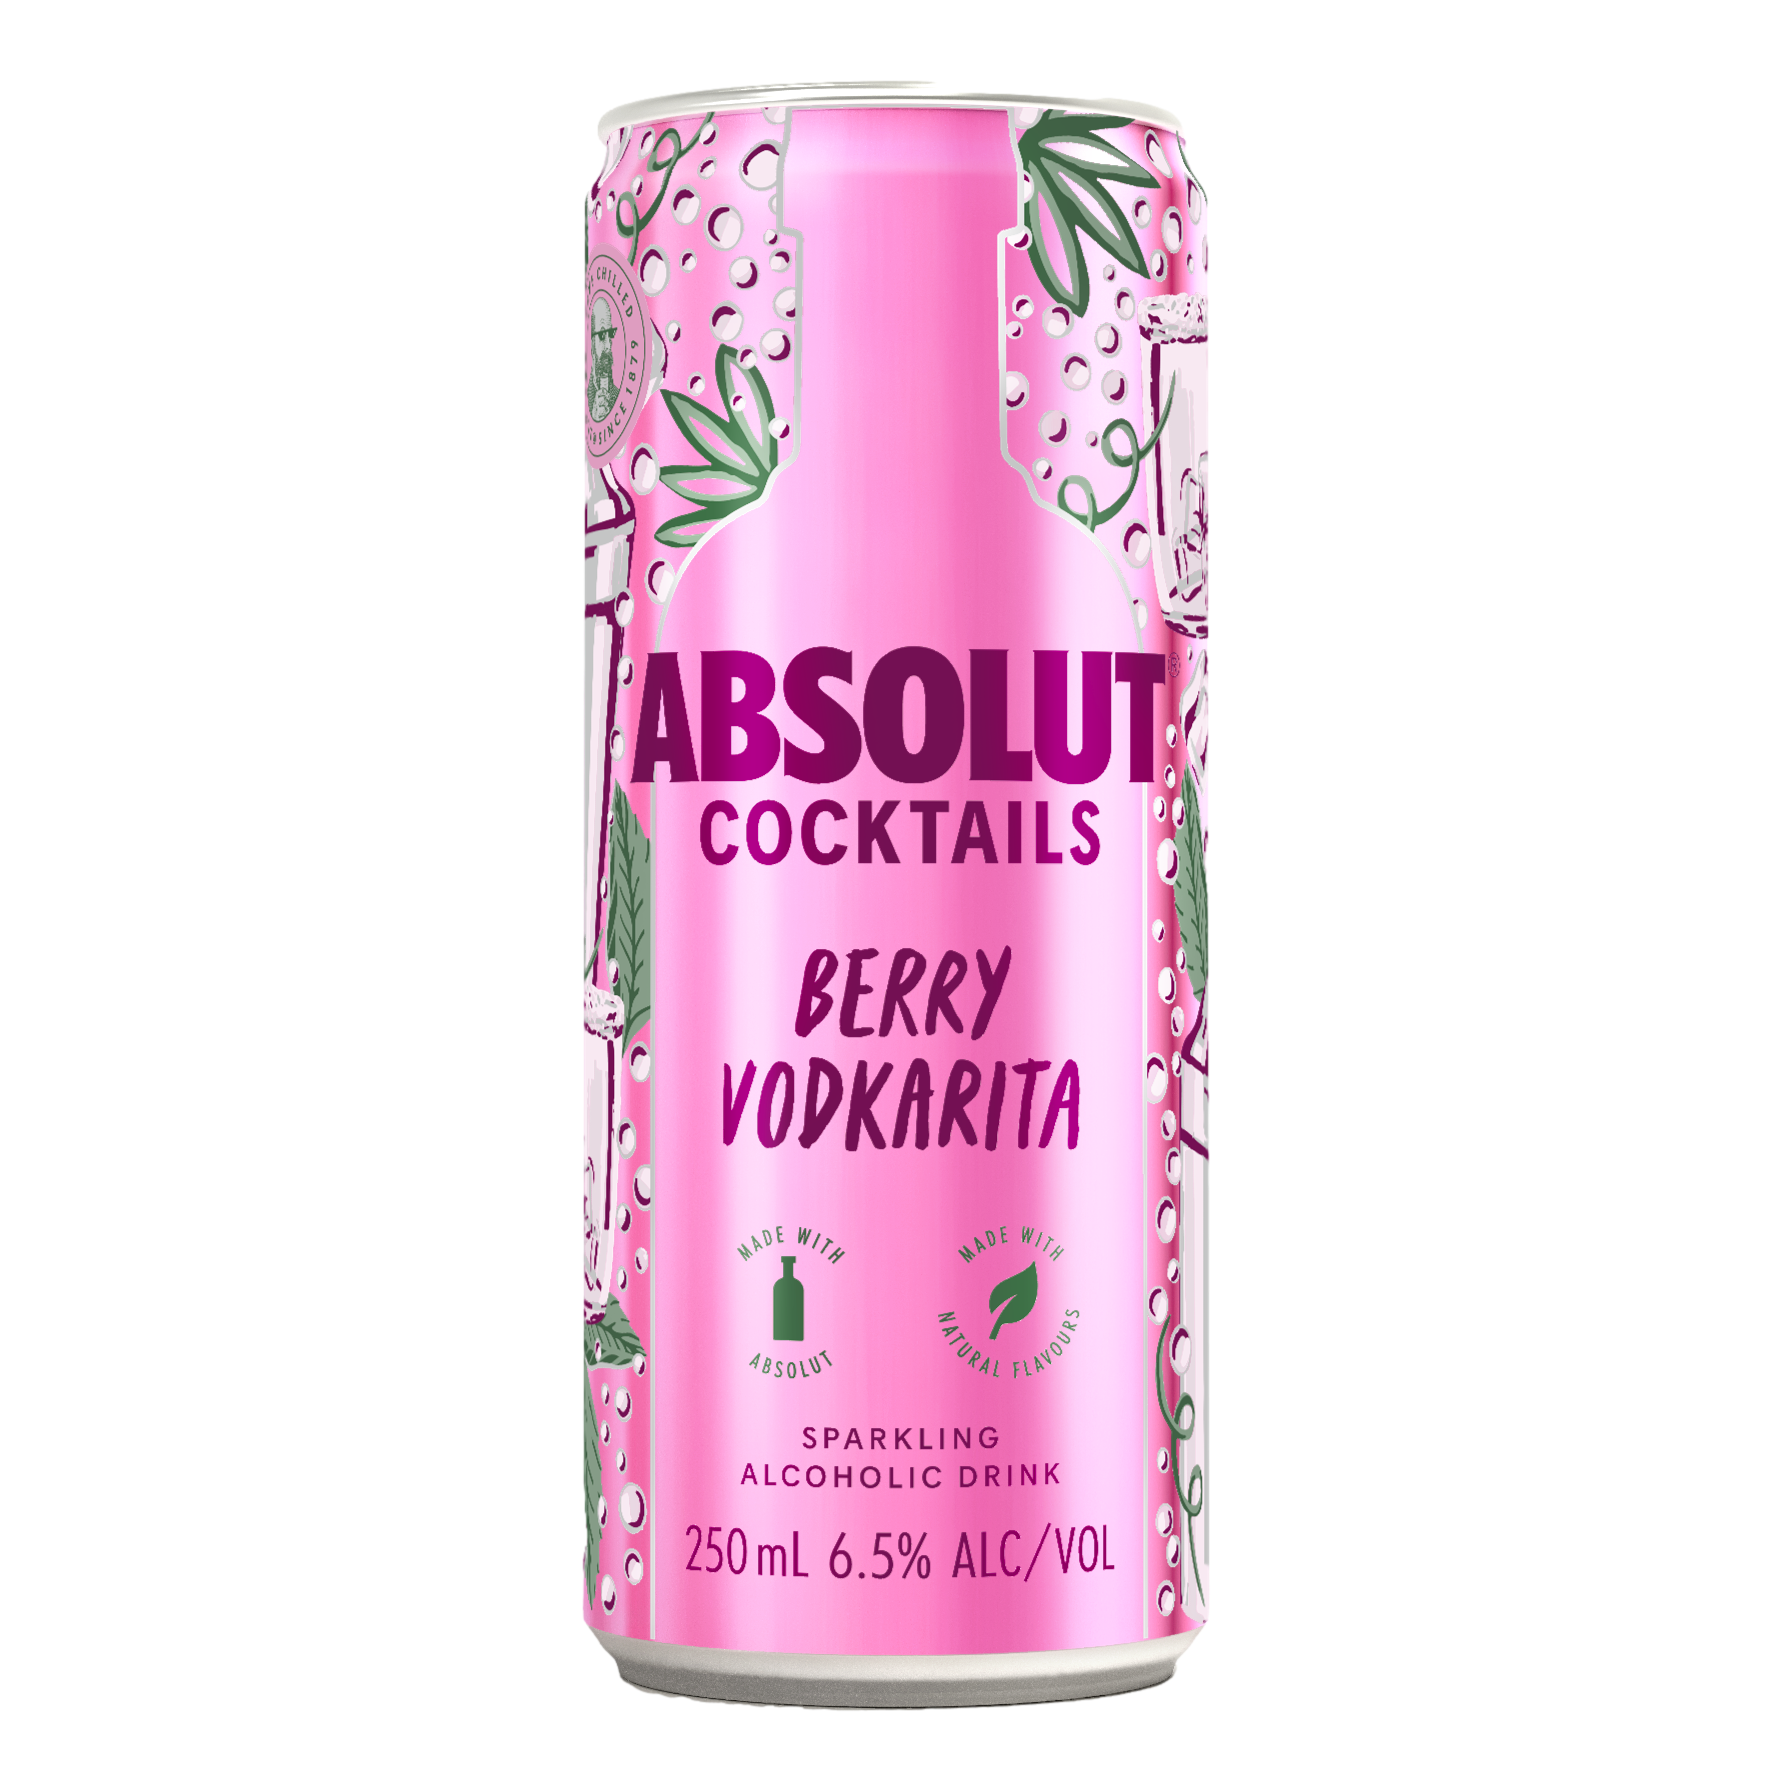 Absolut Cocktails Berry Vodkarita 6.5% 250ml Can Single